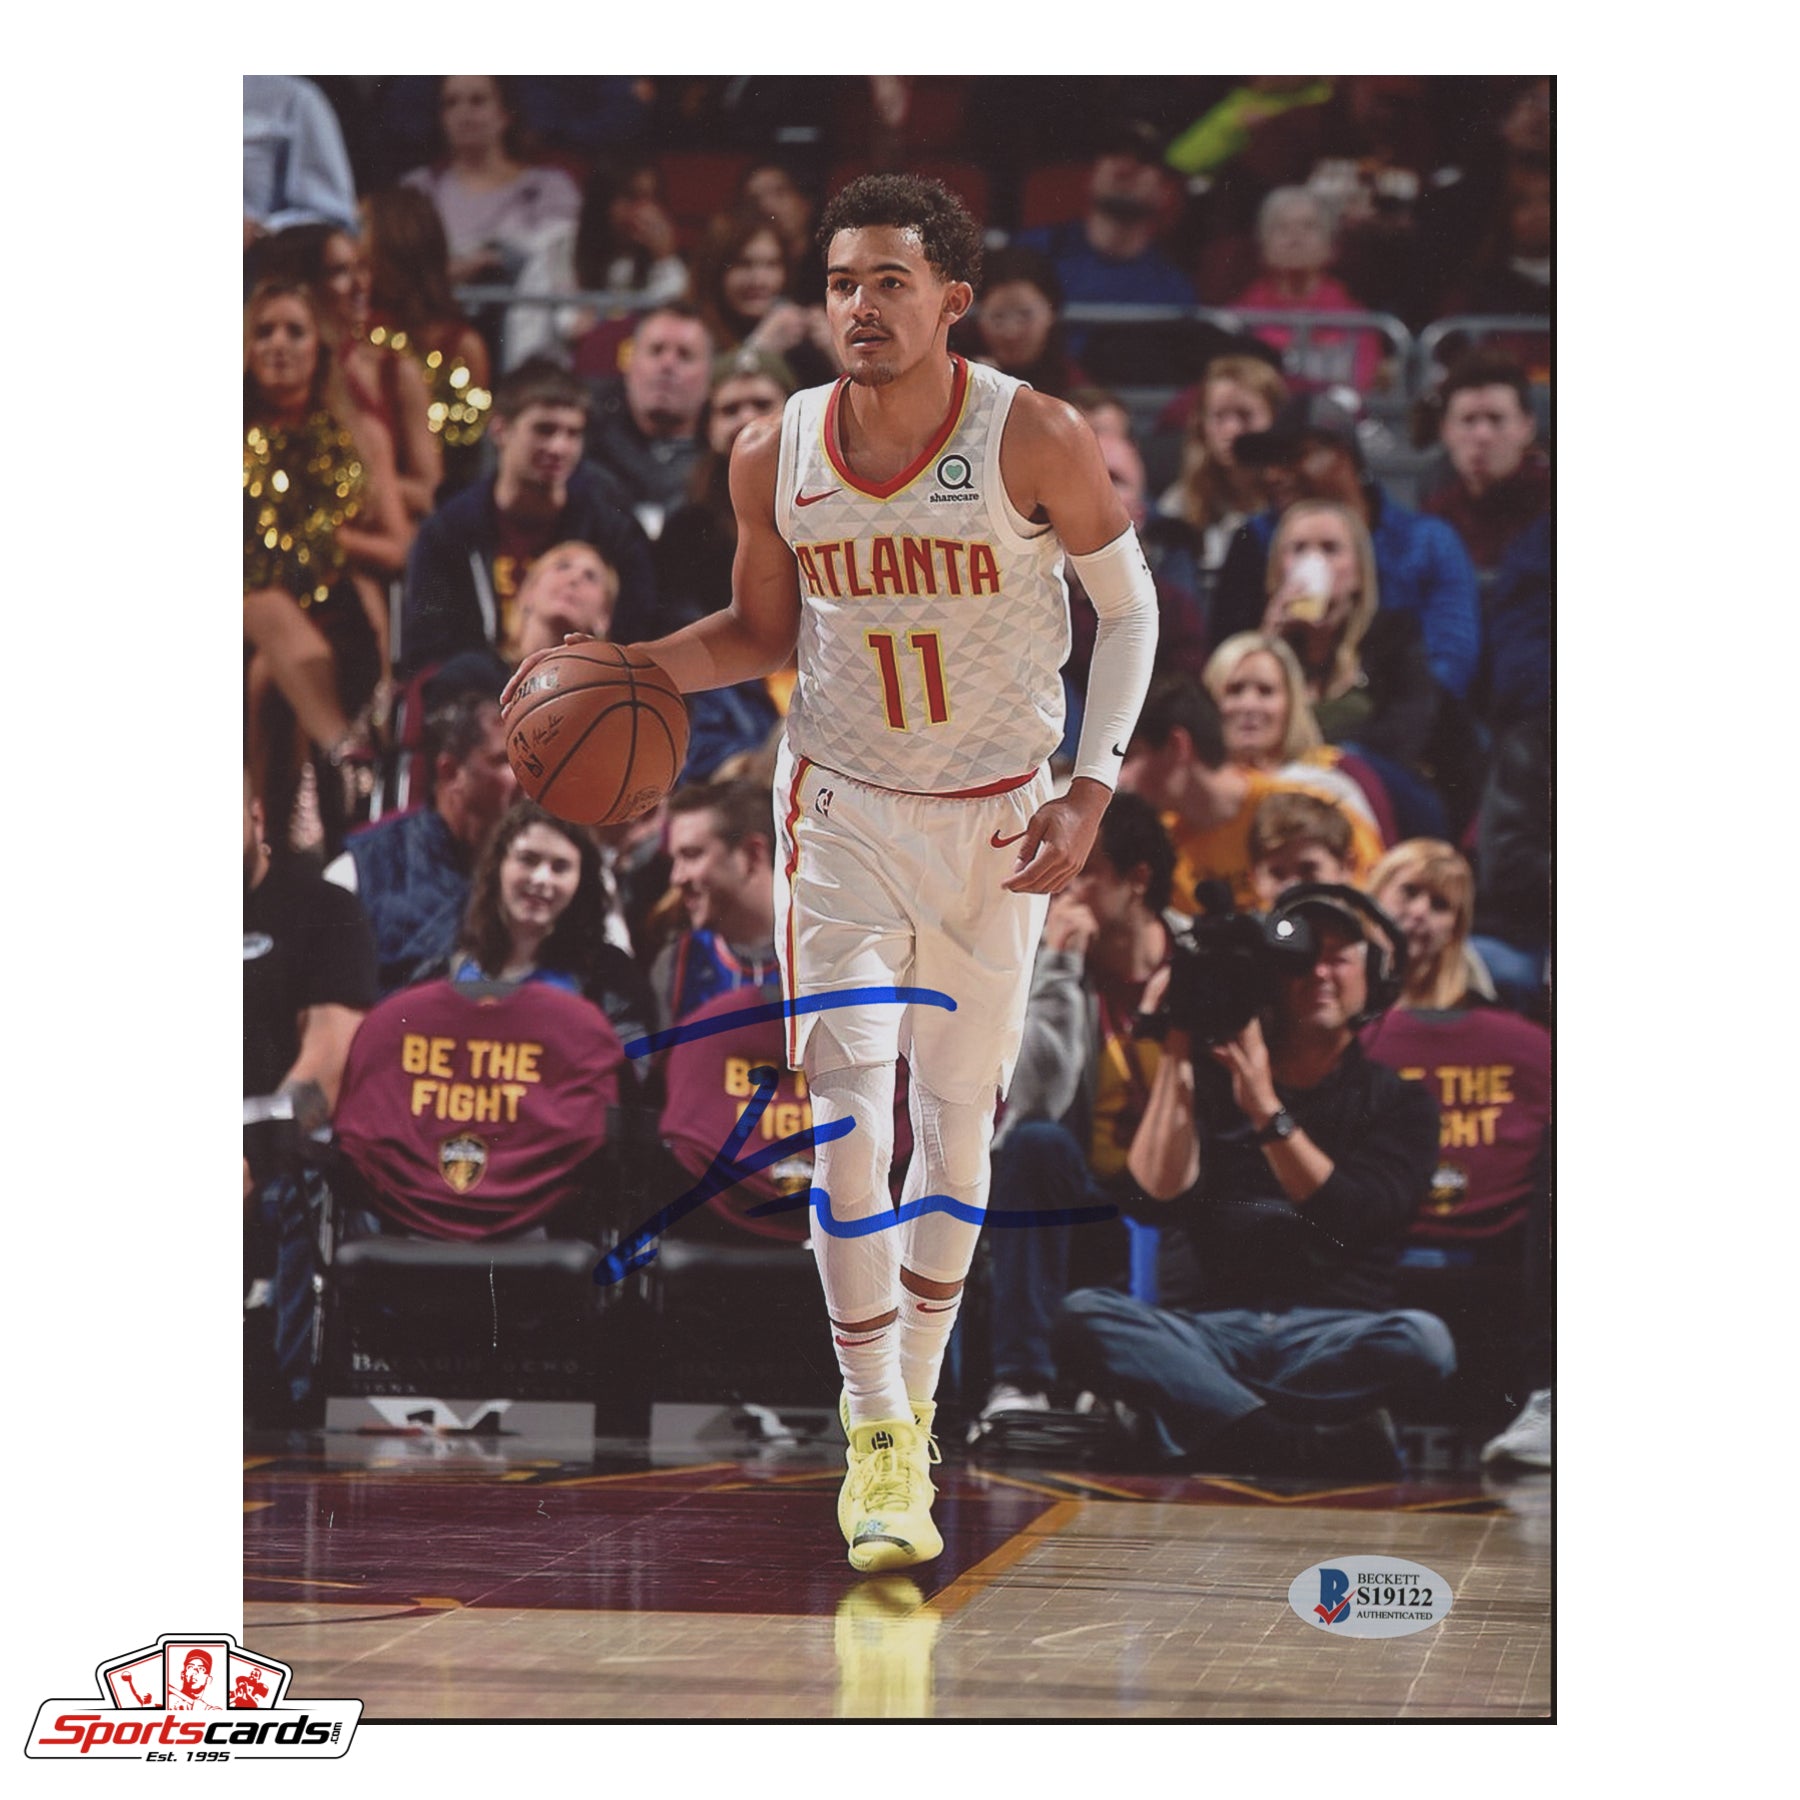 Trae Young Signed Autographed 8x10 Photograph Beckett BAS COA